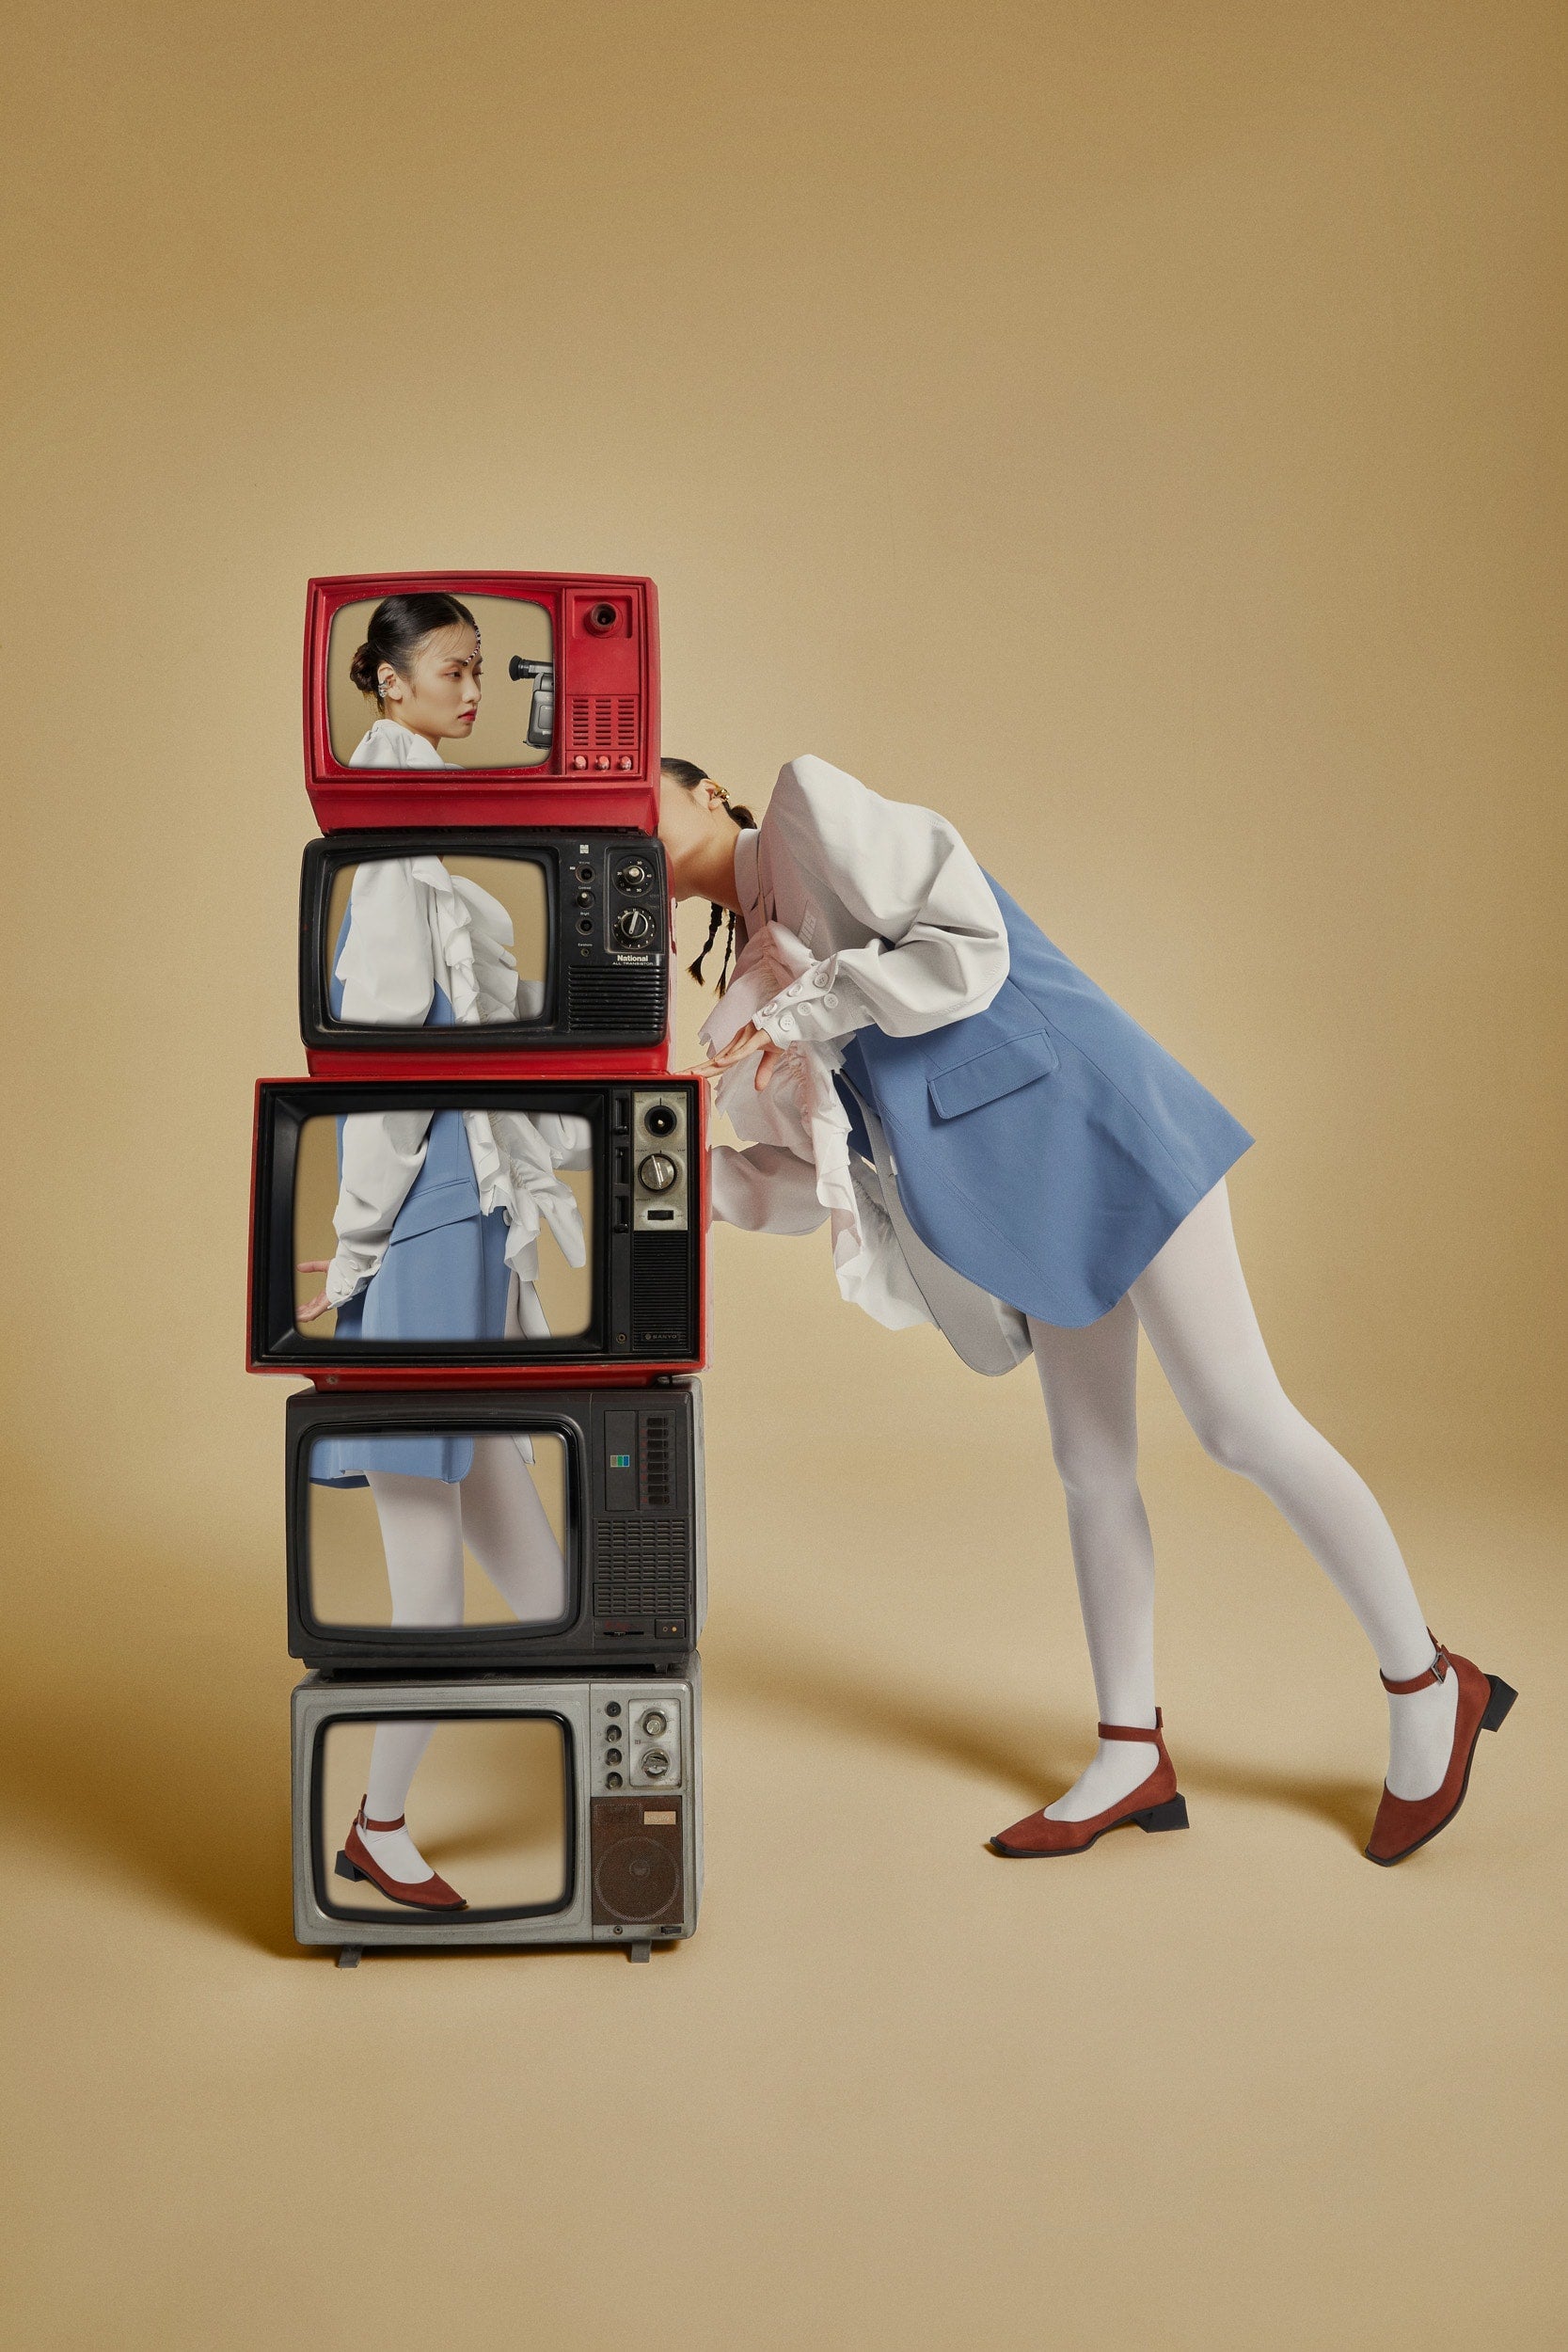 The artpiece 'Snoopy' by Hui Long shows a stack of TV's. Each one showing part of an image of a woman, together they create the entire image. While at the same time the woman is standing next to the TVs and looking at it.